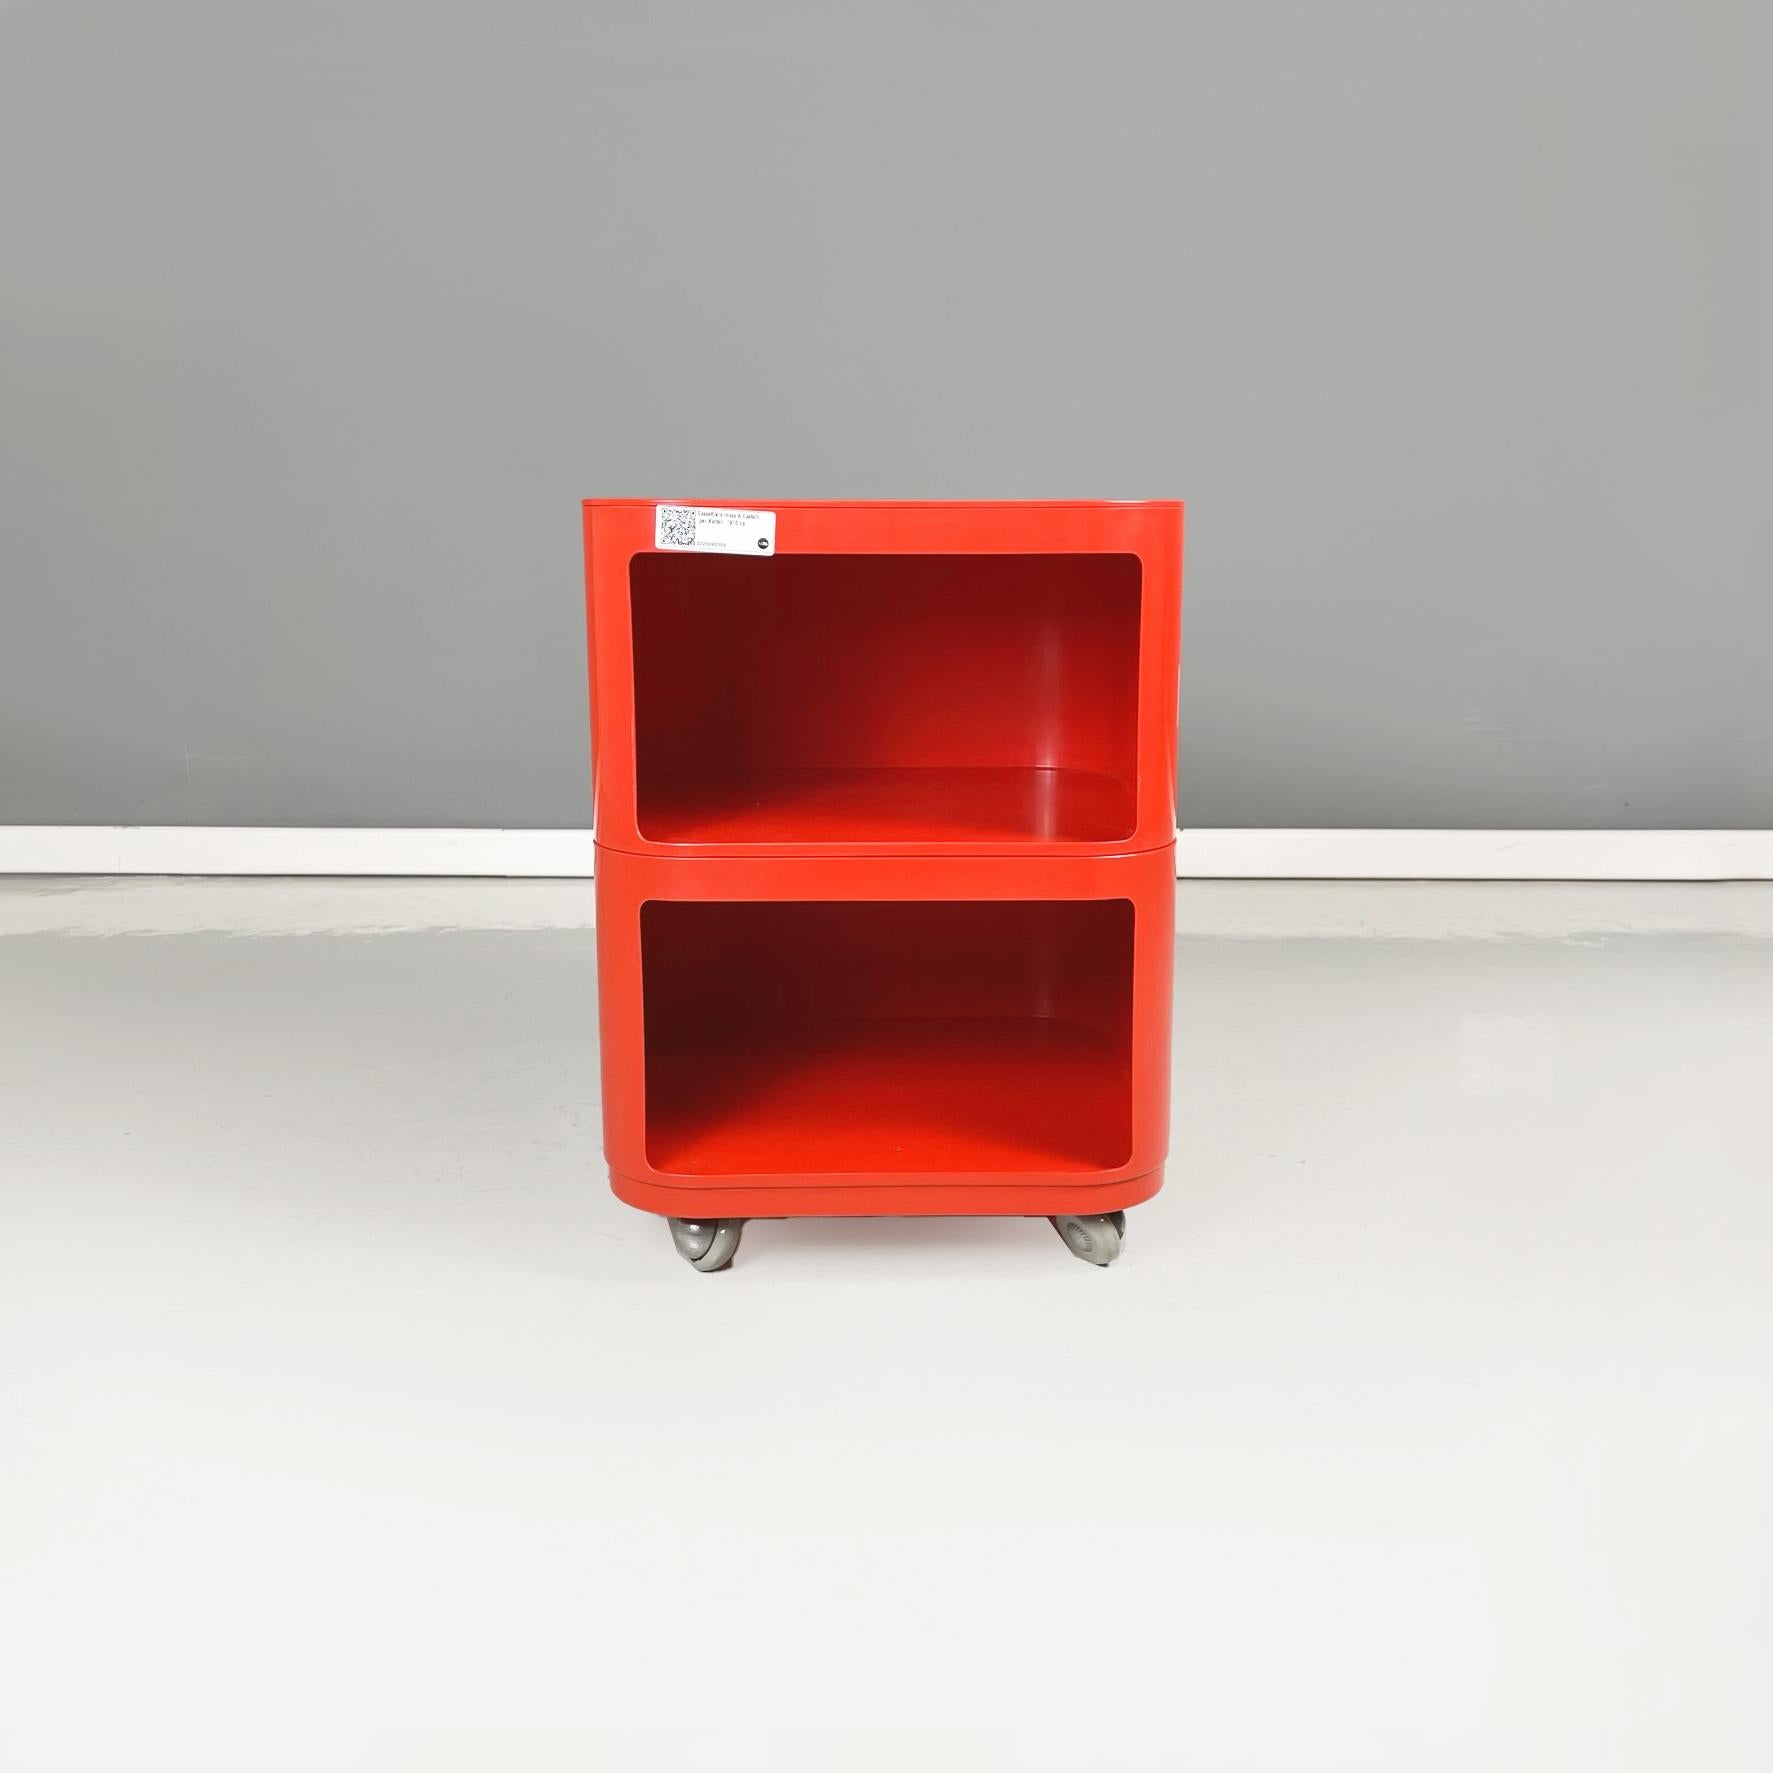 Italian Space Age Red plastic Modular chest of drawers by Anna Castelli for Kartell, 1970s
Modular chest of drawers with square base and rounded corners in red plastic. The chest of drawers has two open compartments. Wheels at the base. It can also